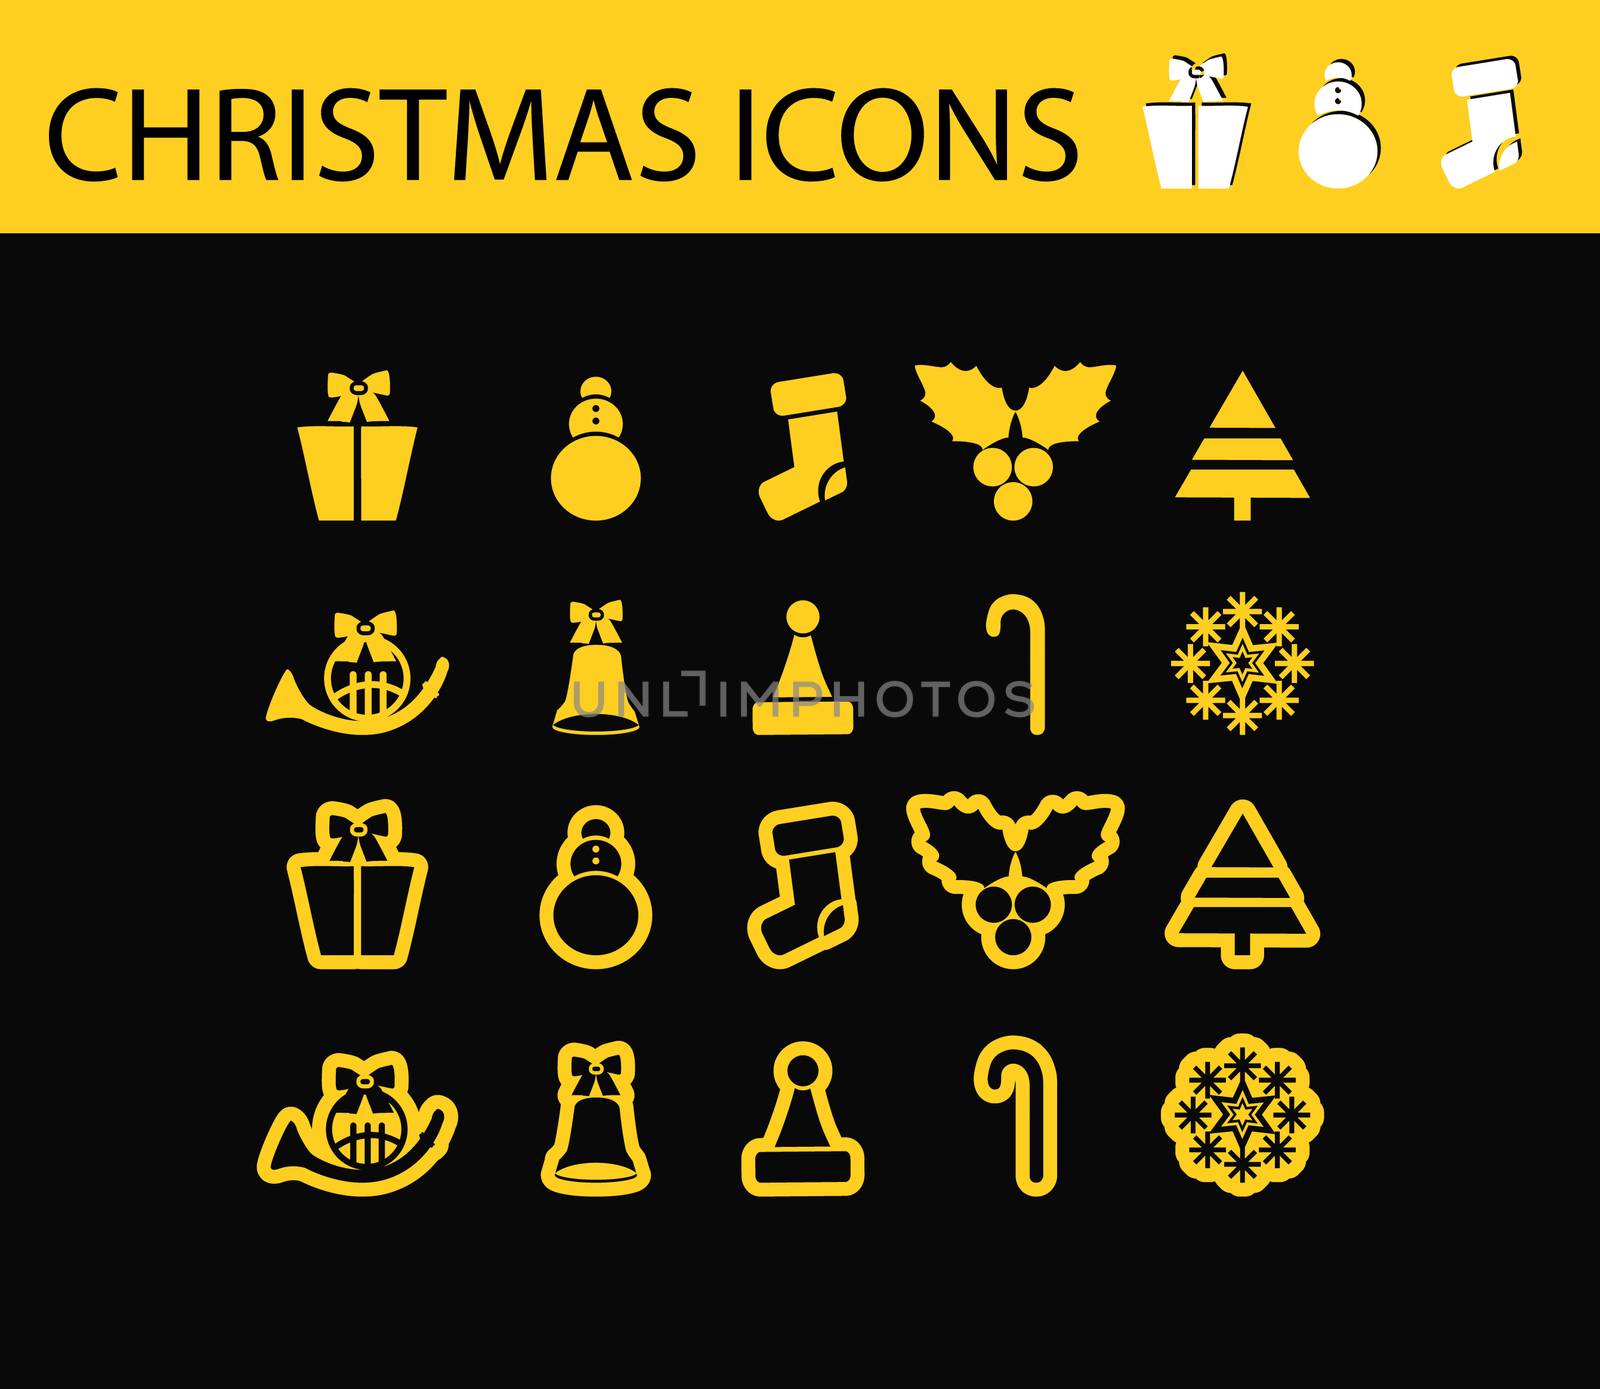 Abstract vector illustration of schristmas icons and symbols, shiny web buttons, tags on black background